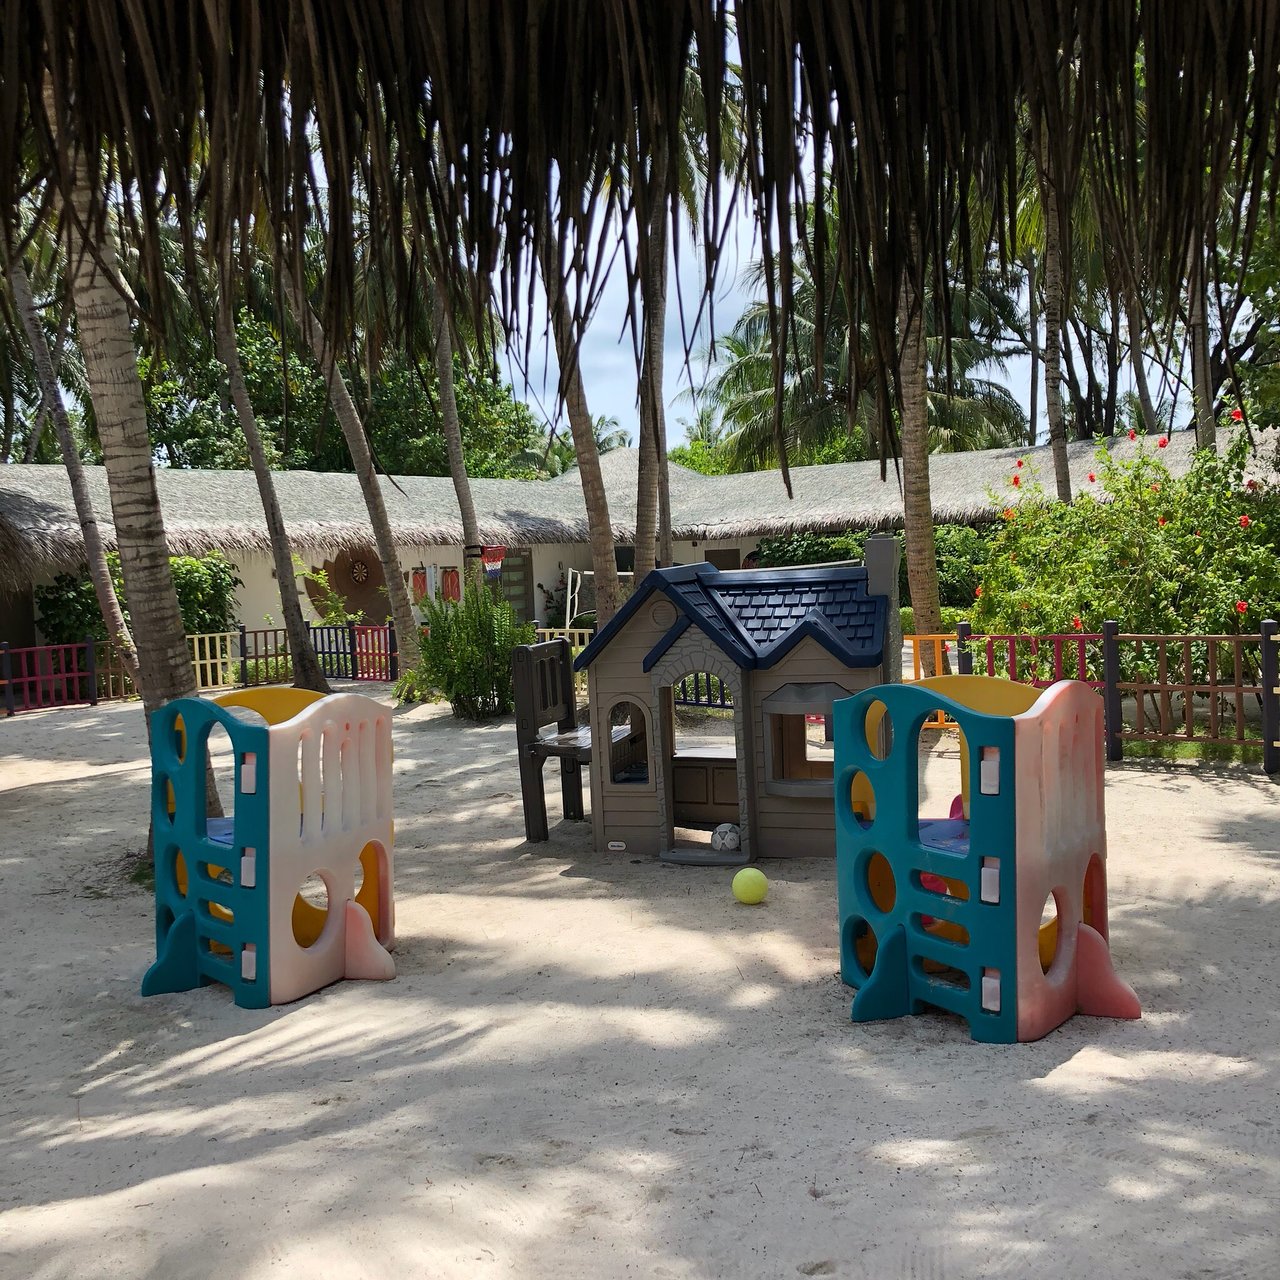 LUX South Ari Atoll Kids Club Outdoor Play